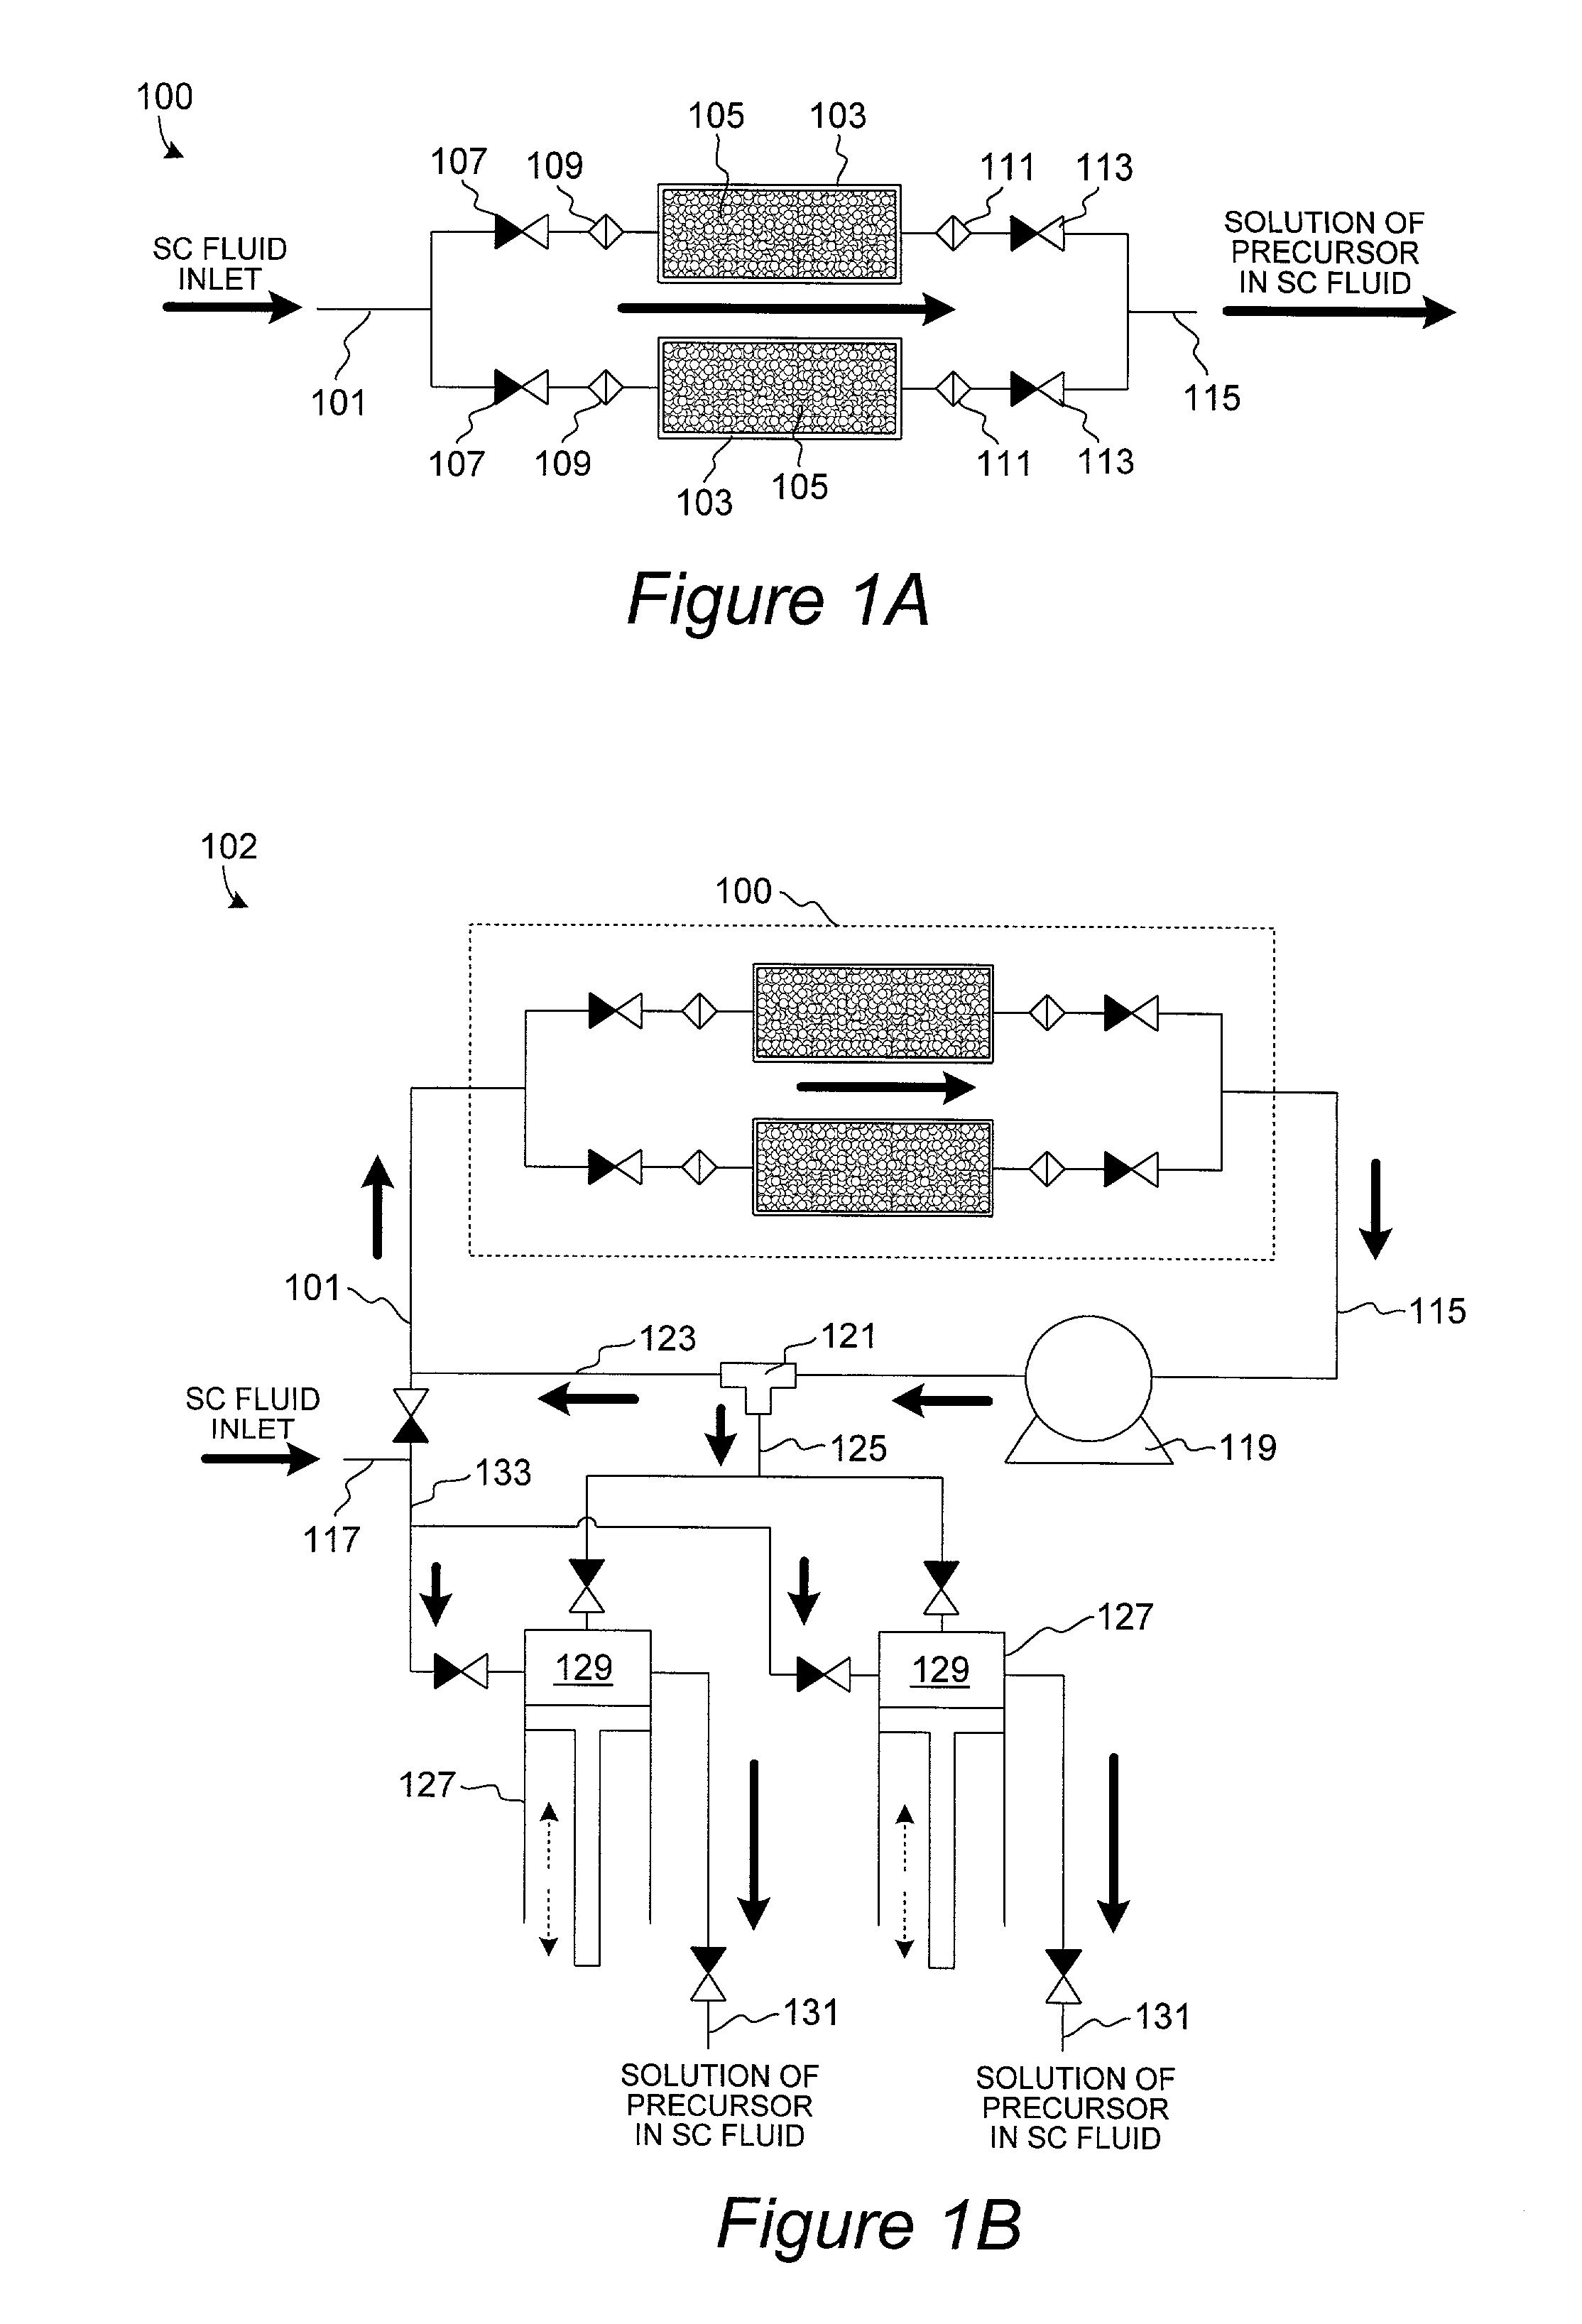 Method and apparatus for introduction of solid precursors and reactants into a supercritical fluid reactor